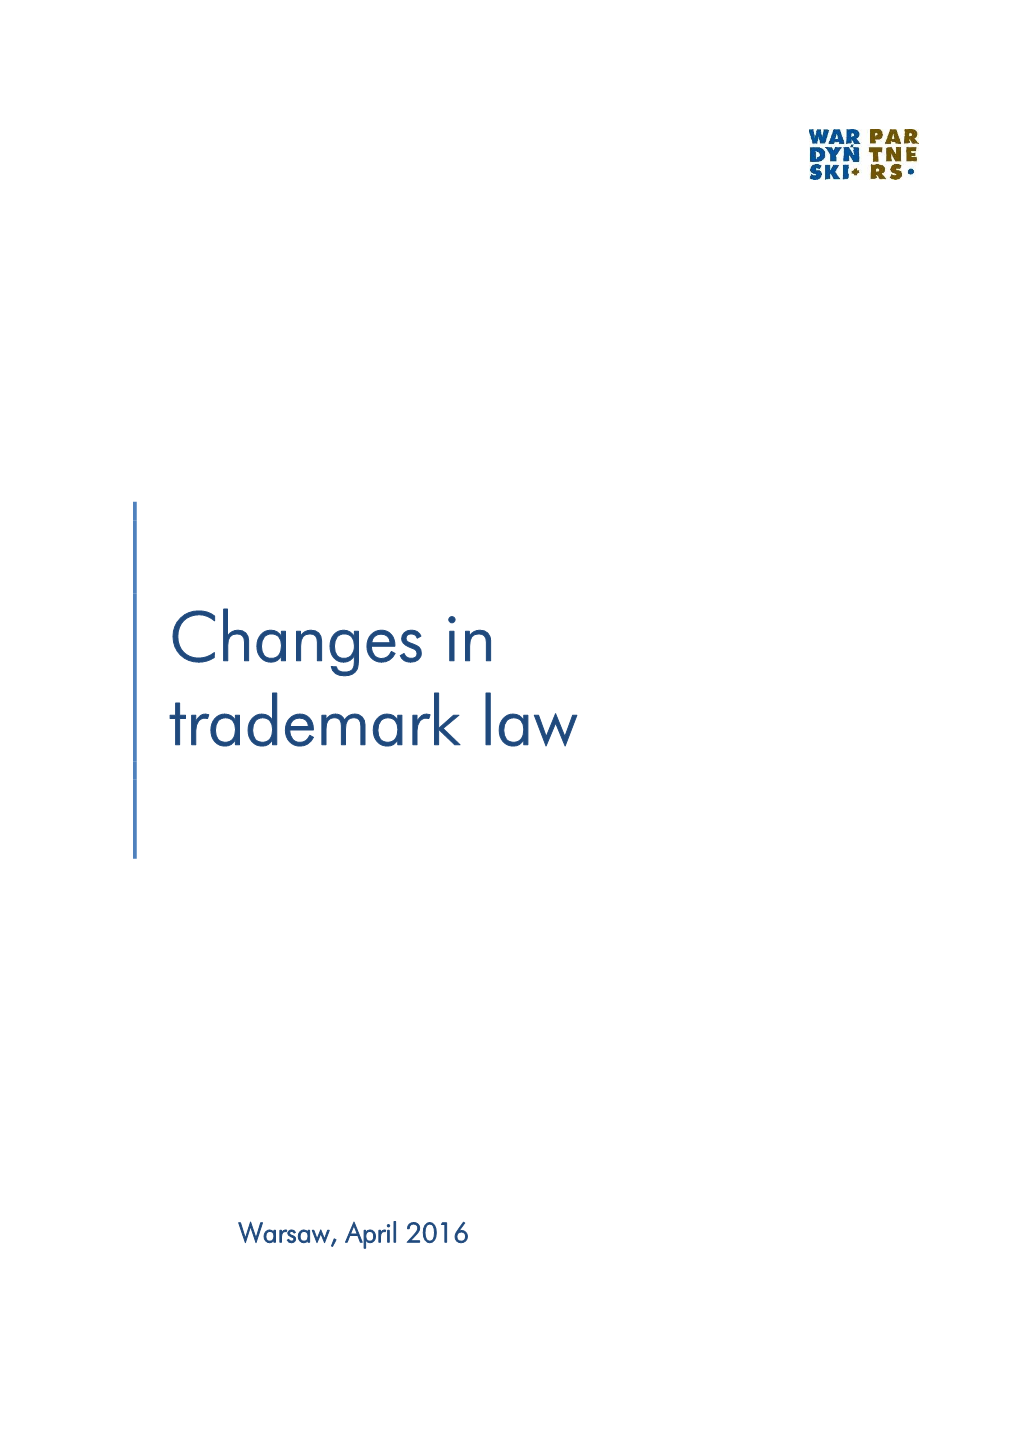 Changes in Trademark Law